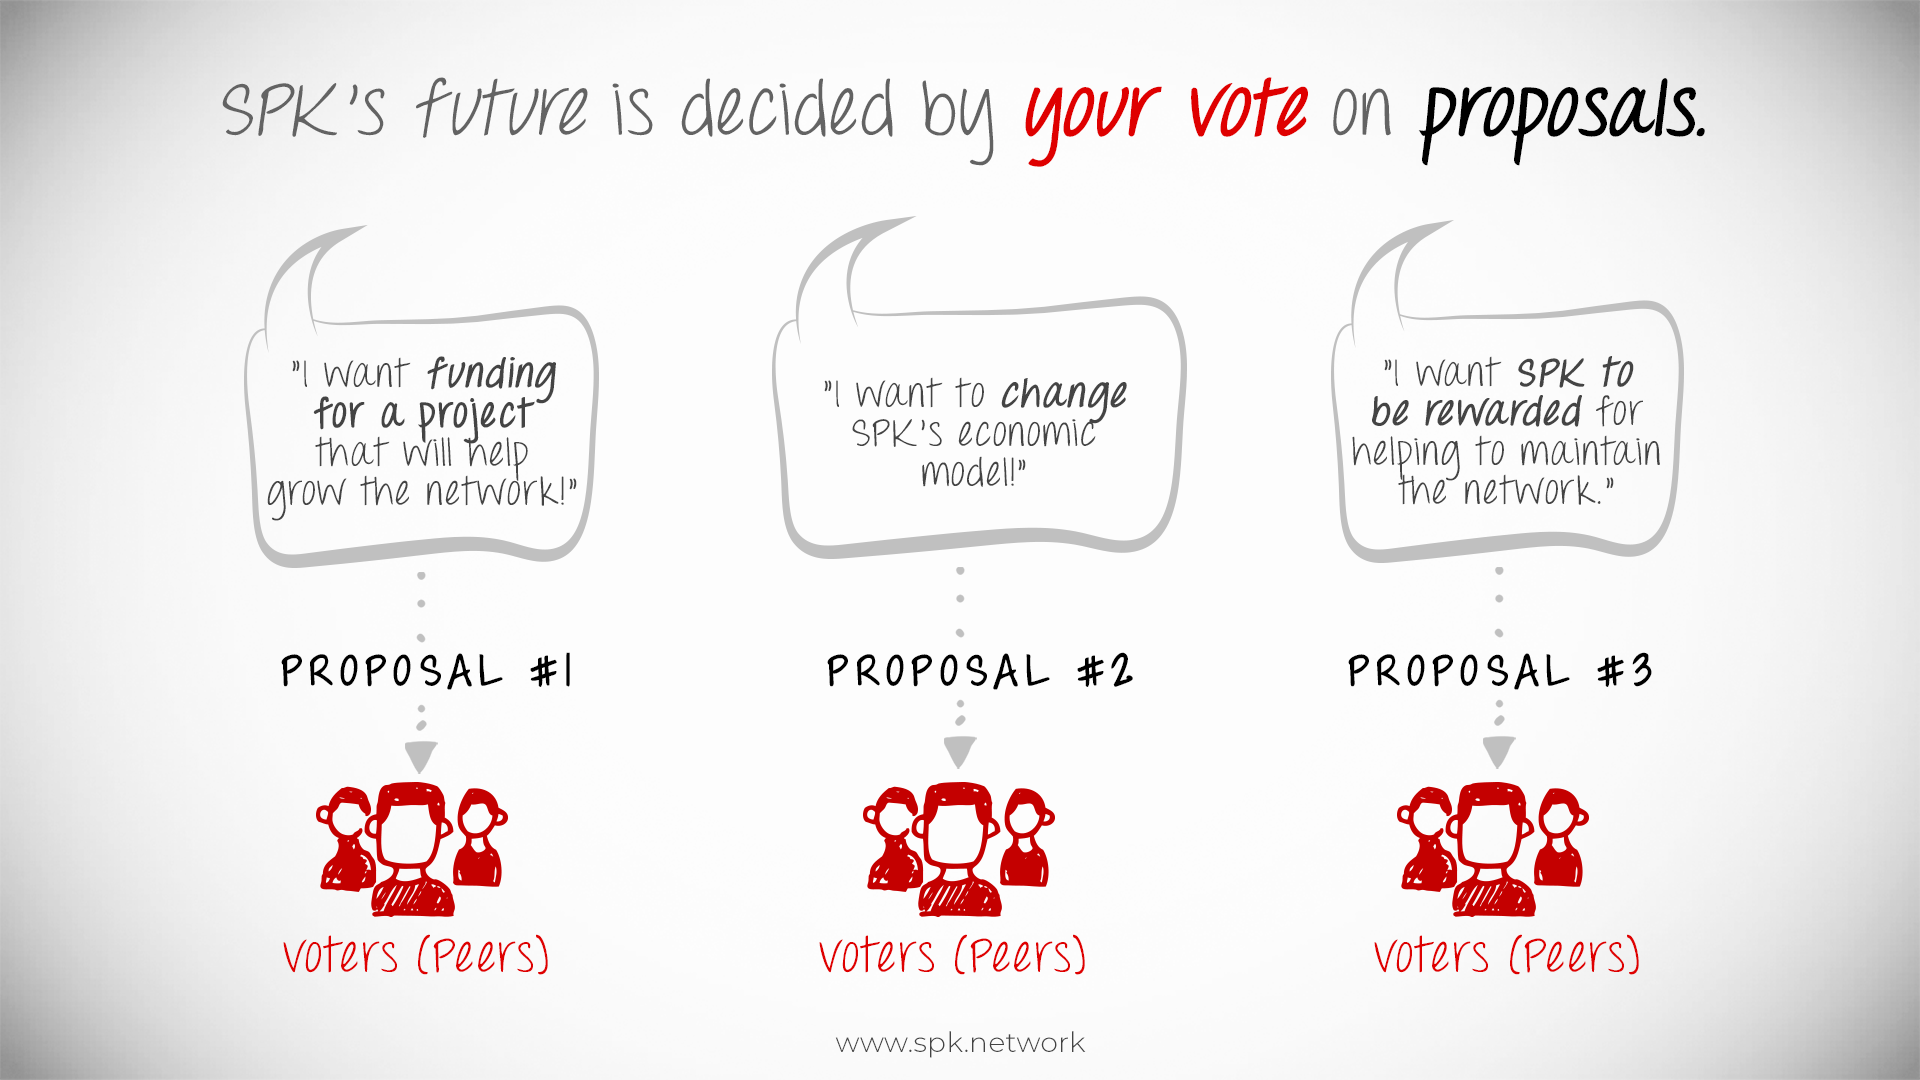 @spknetwork/spk-network-or-the-future-is-decided-by-your-vote-on-proposals